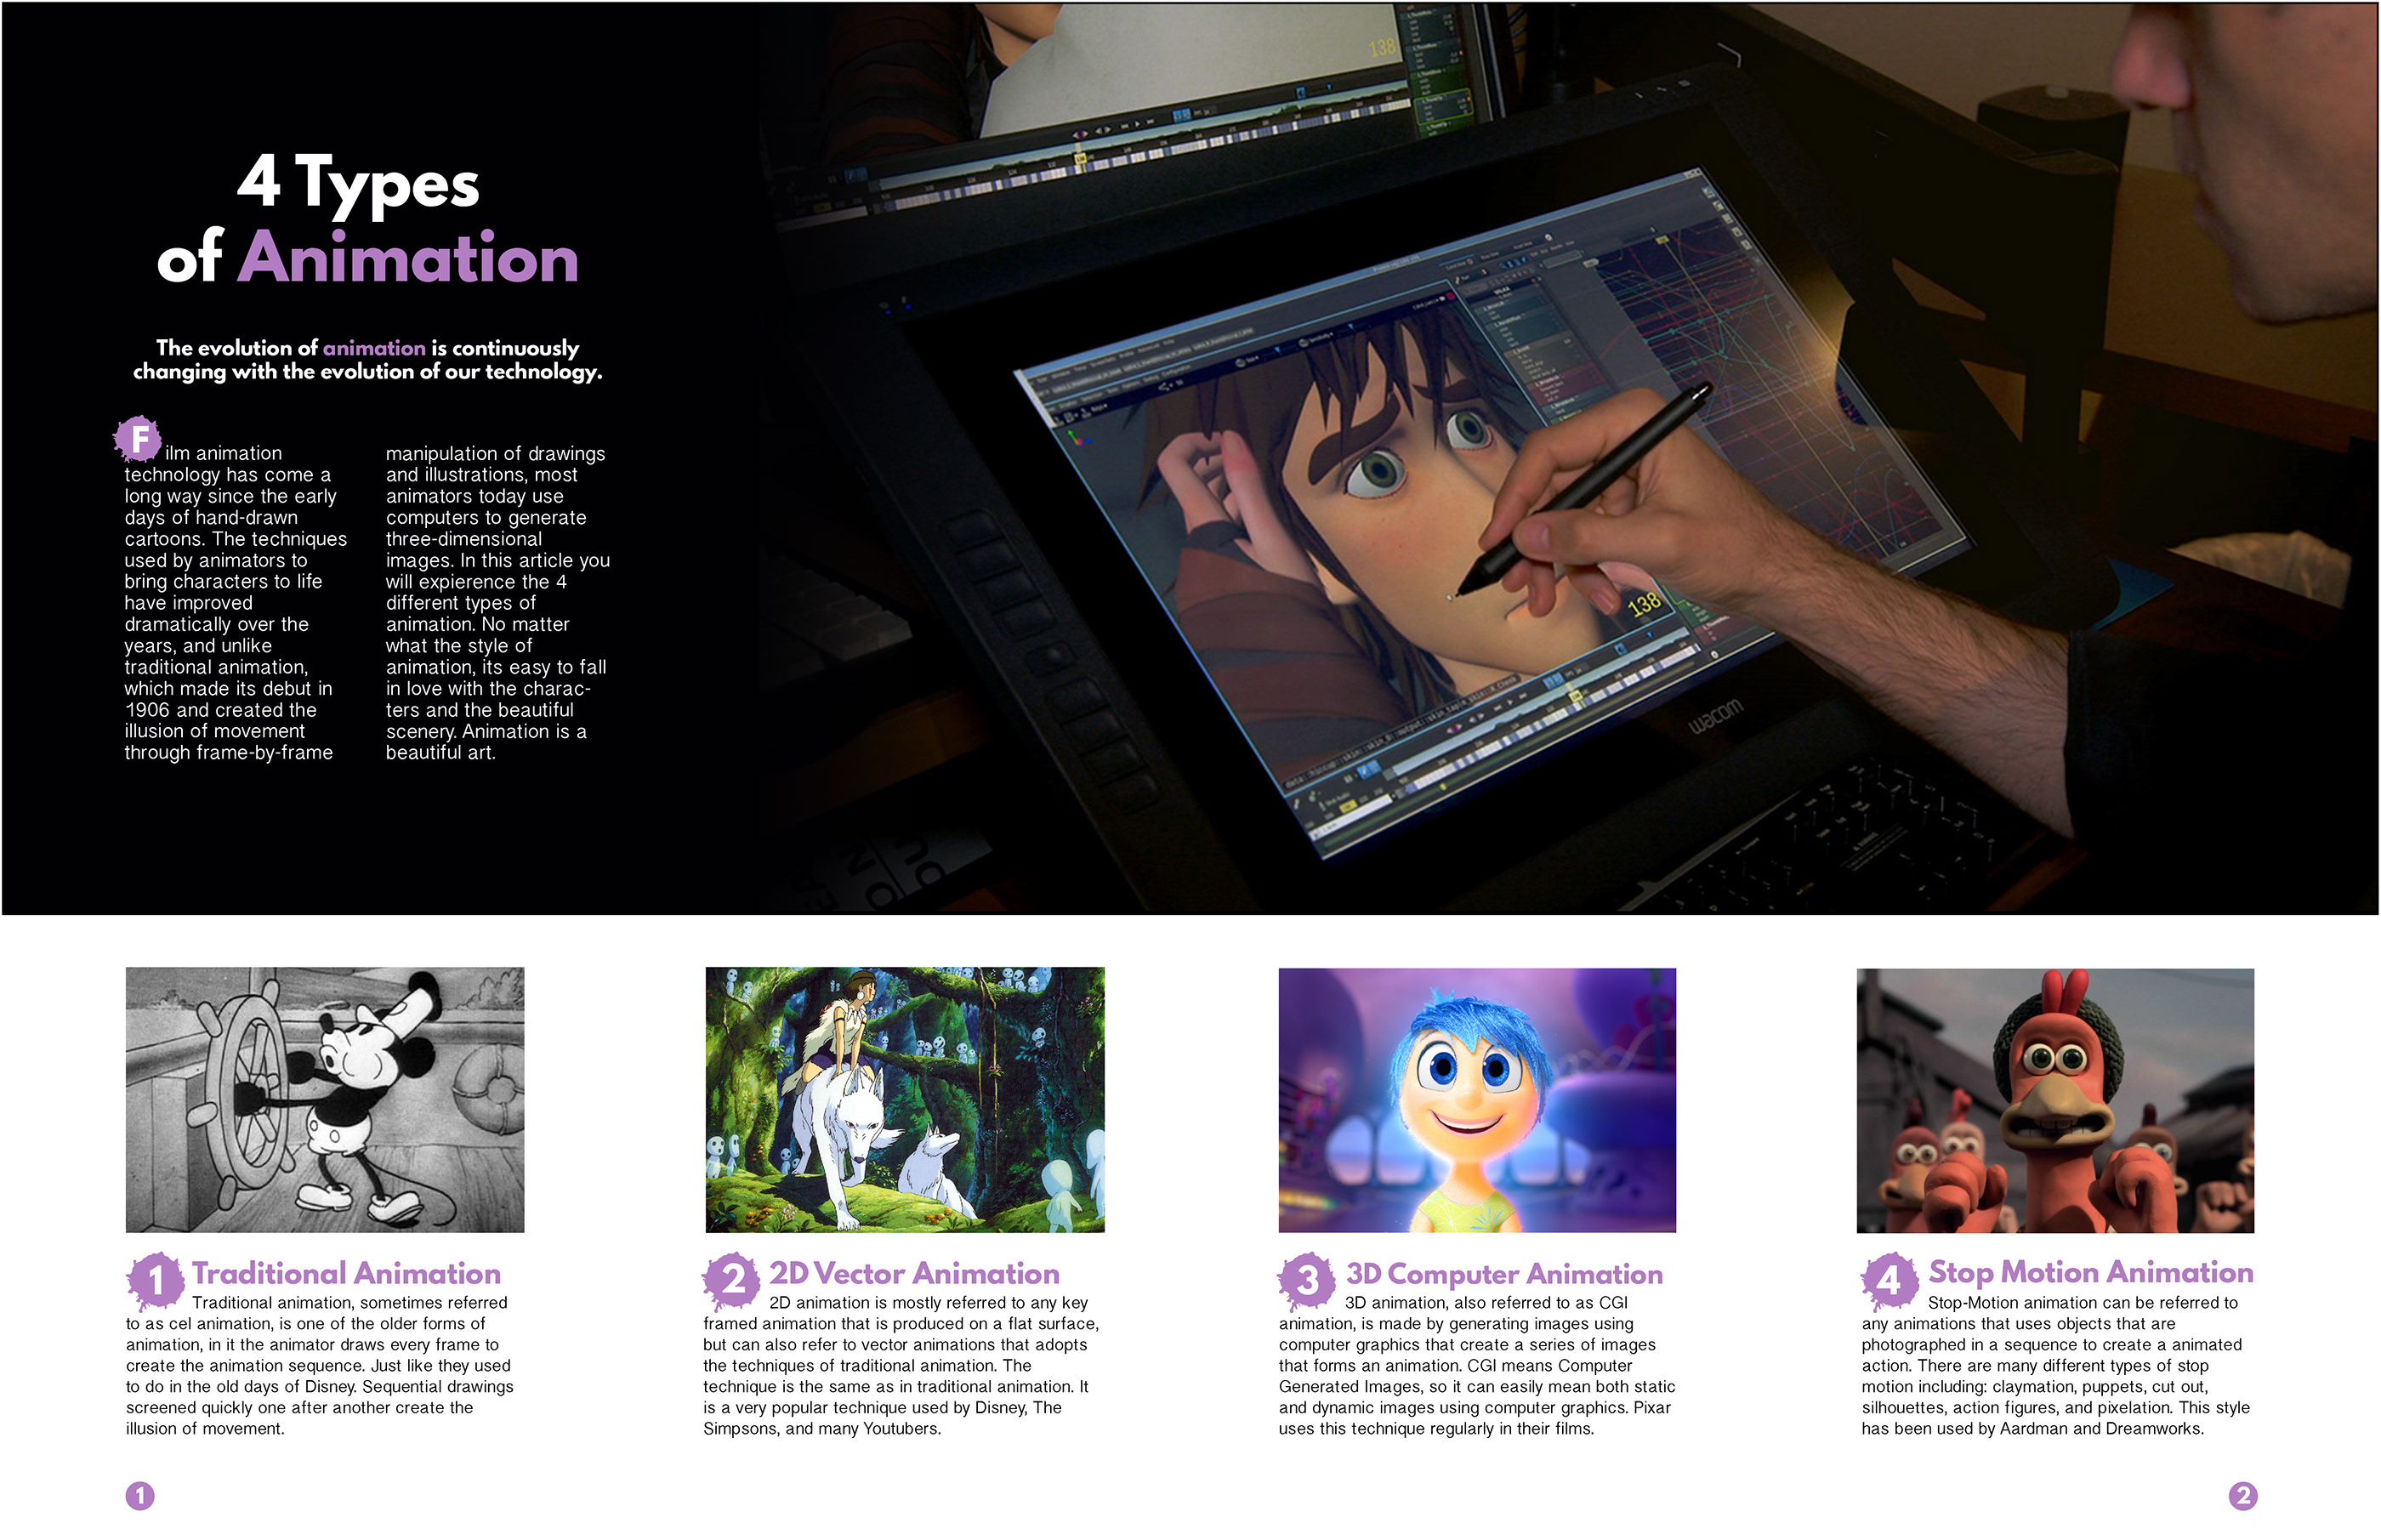 4 Types of Animation Spread on Behance